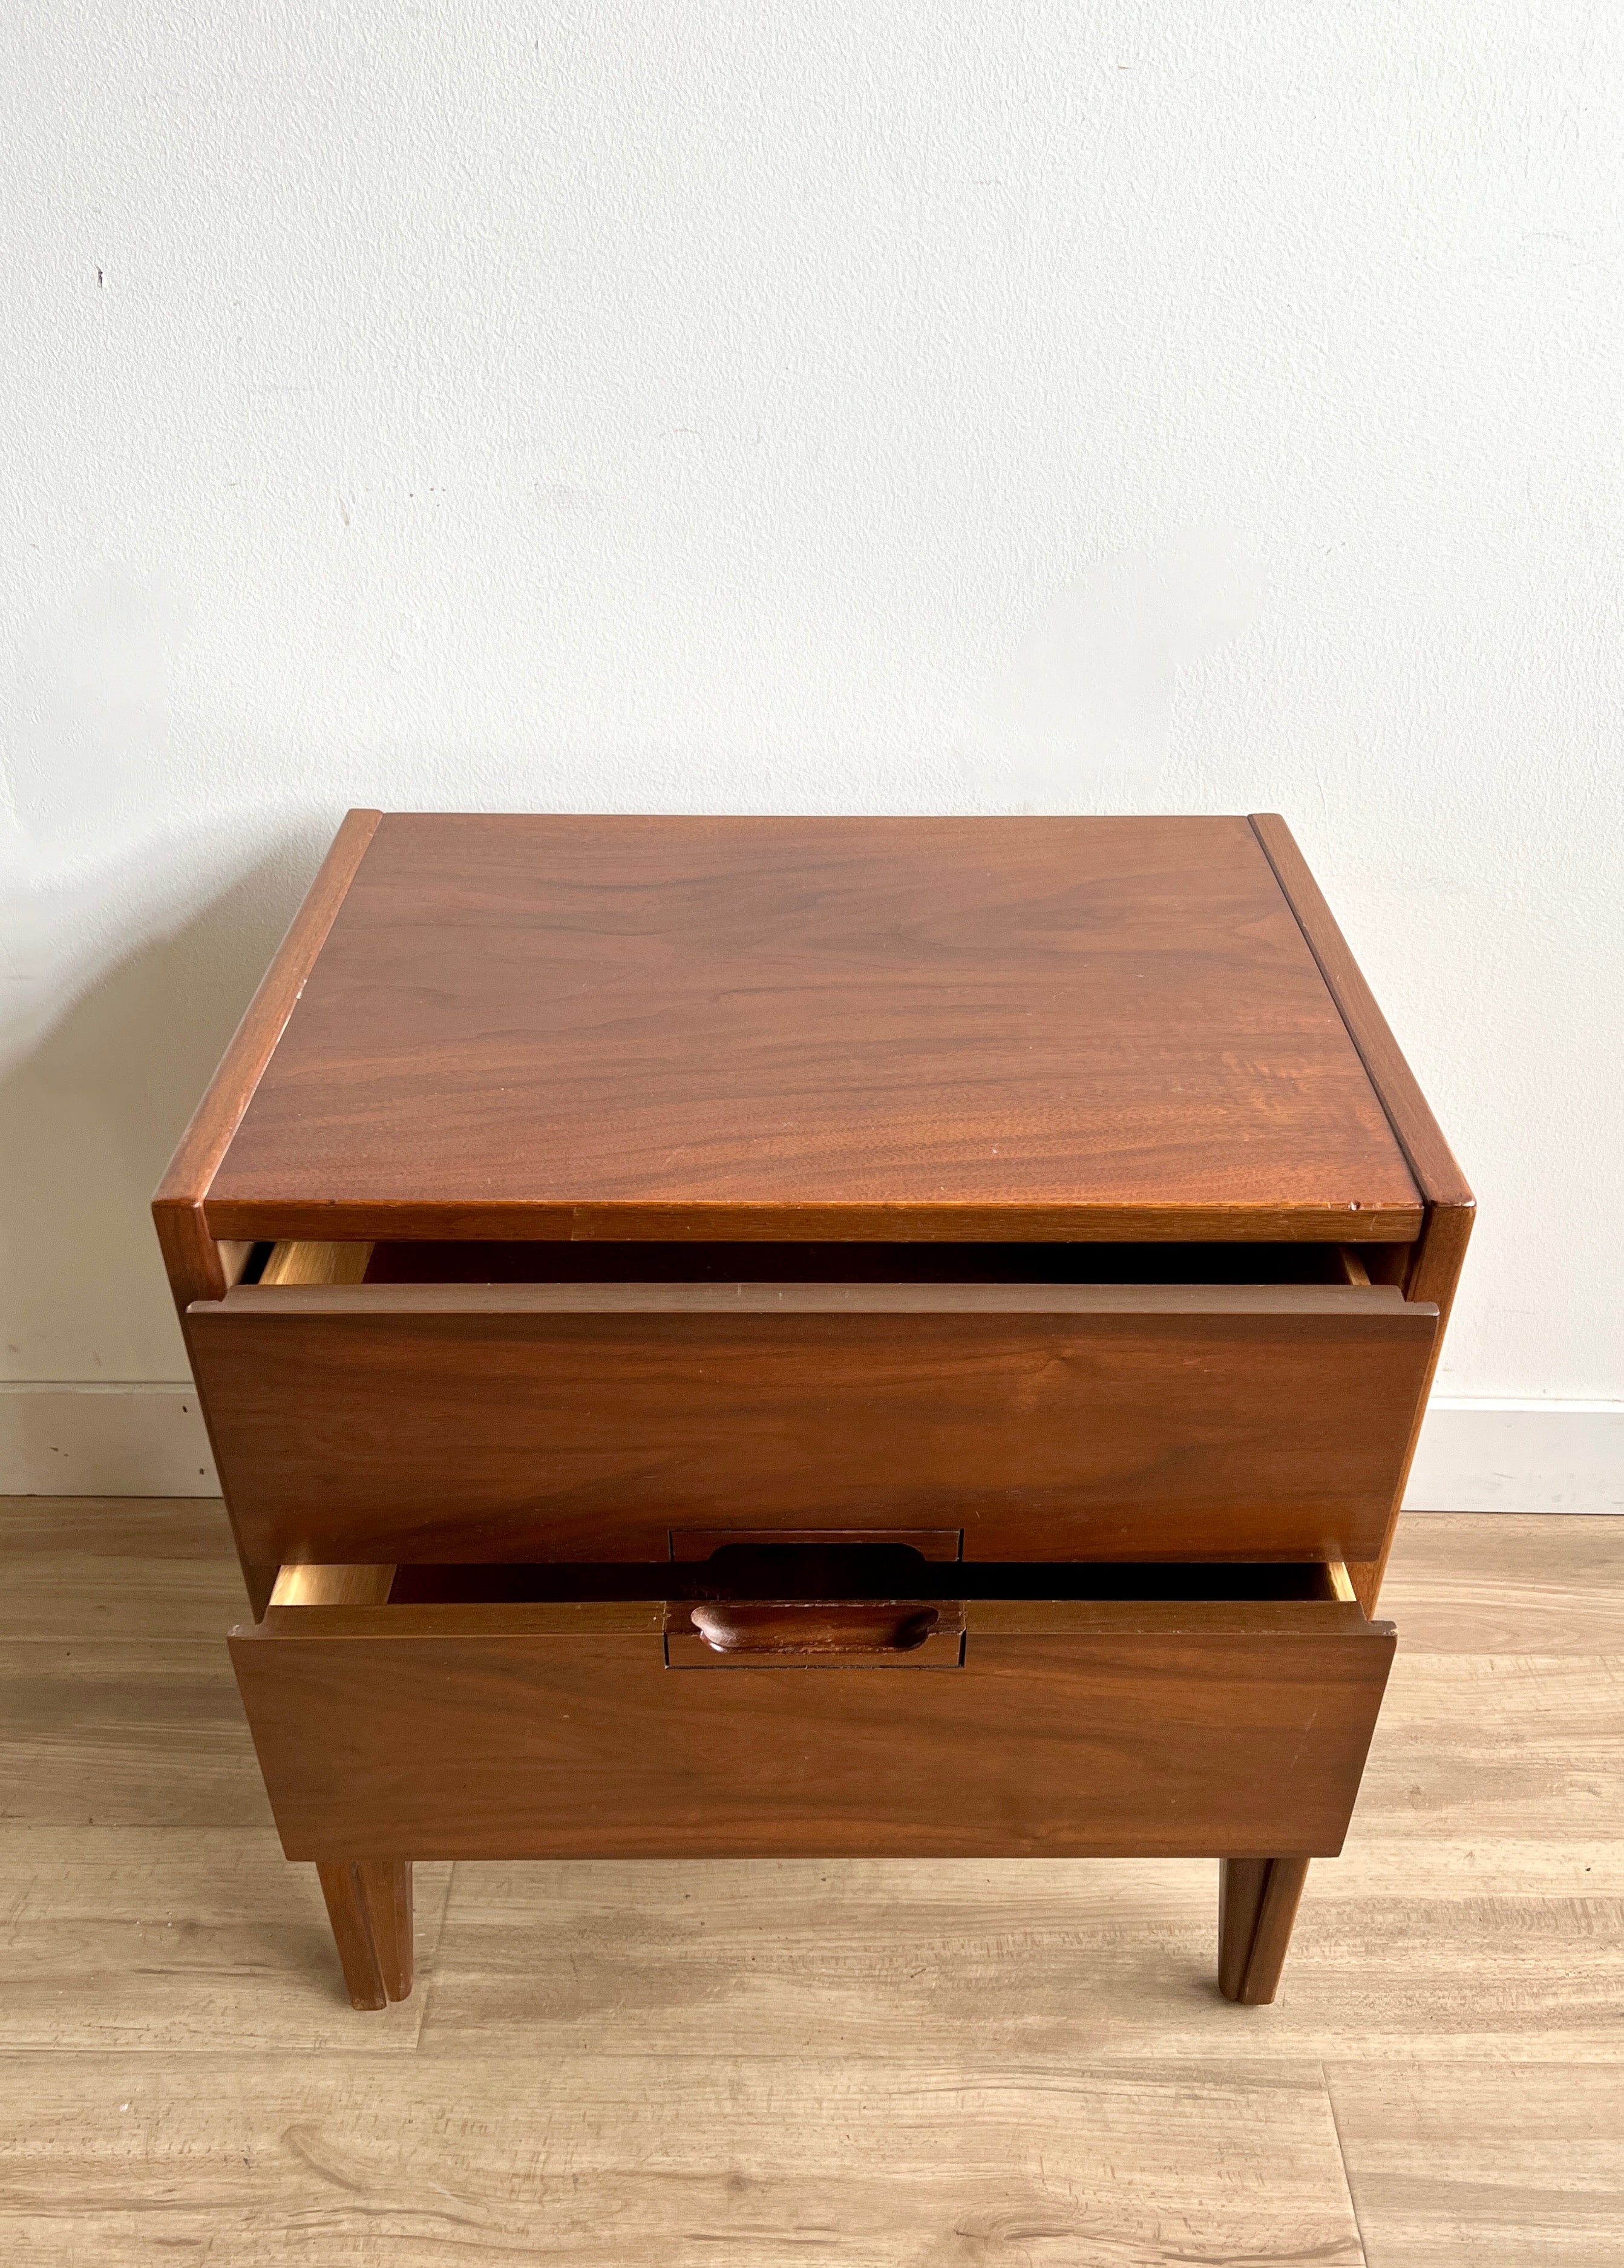 Vintage Mid Century End Table / Night Stand